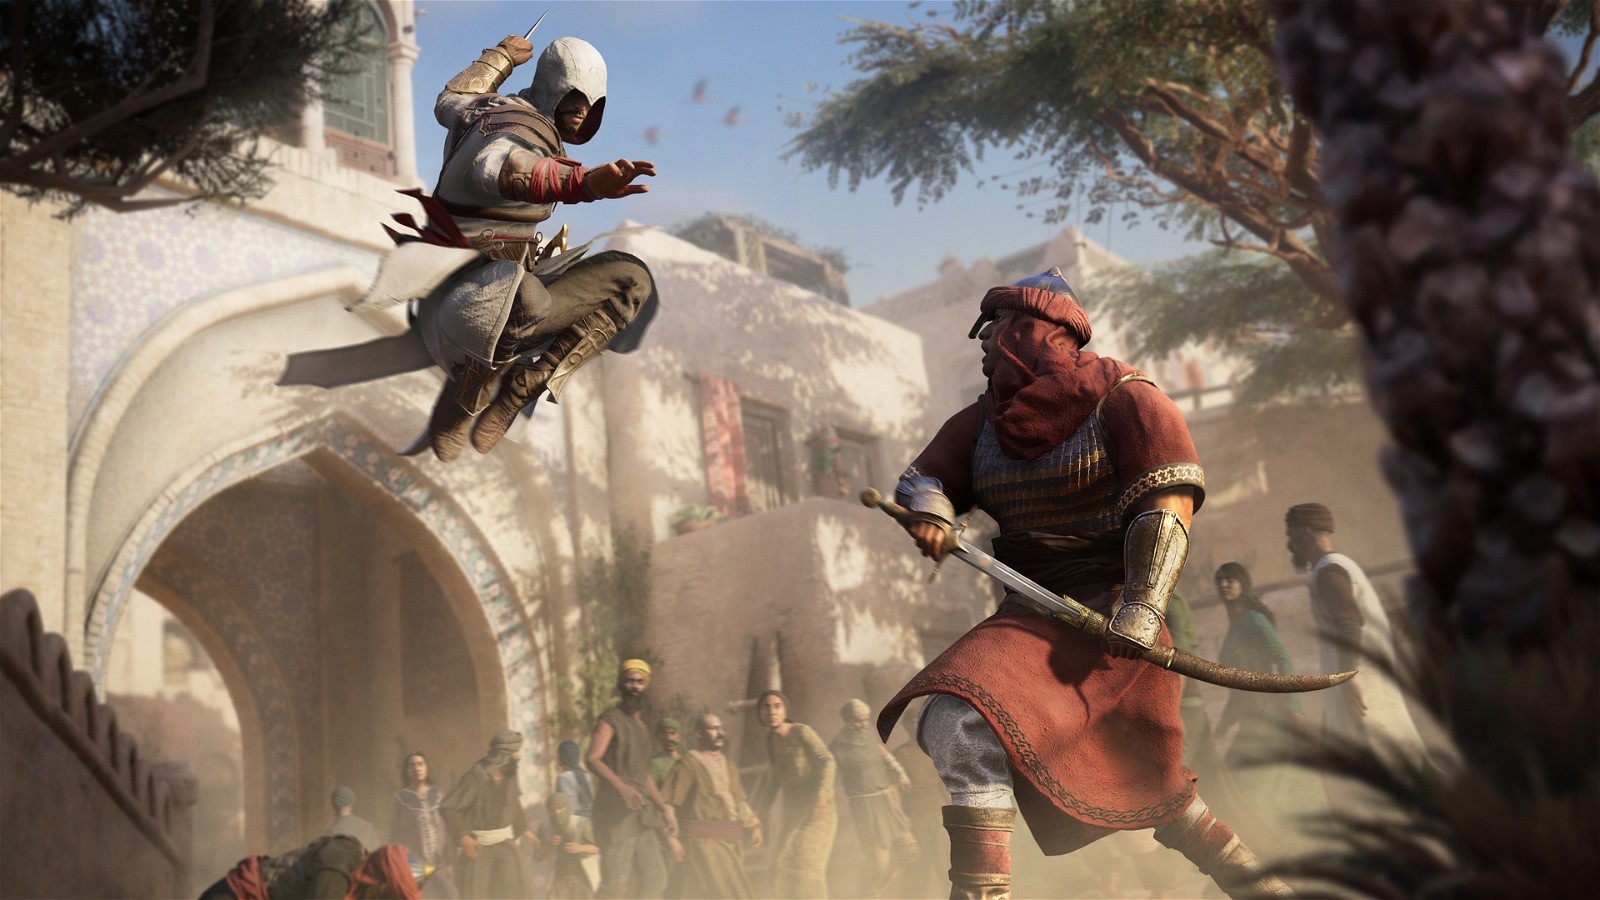 The Conquistadors may have better weapons, but the Assassins will have the power of stealth on their side.